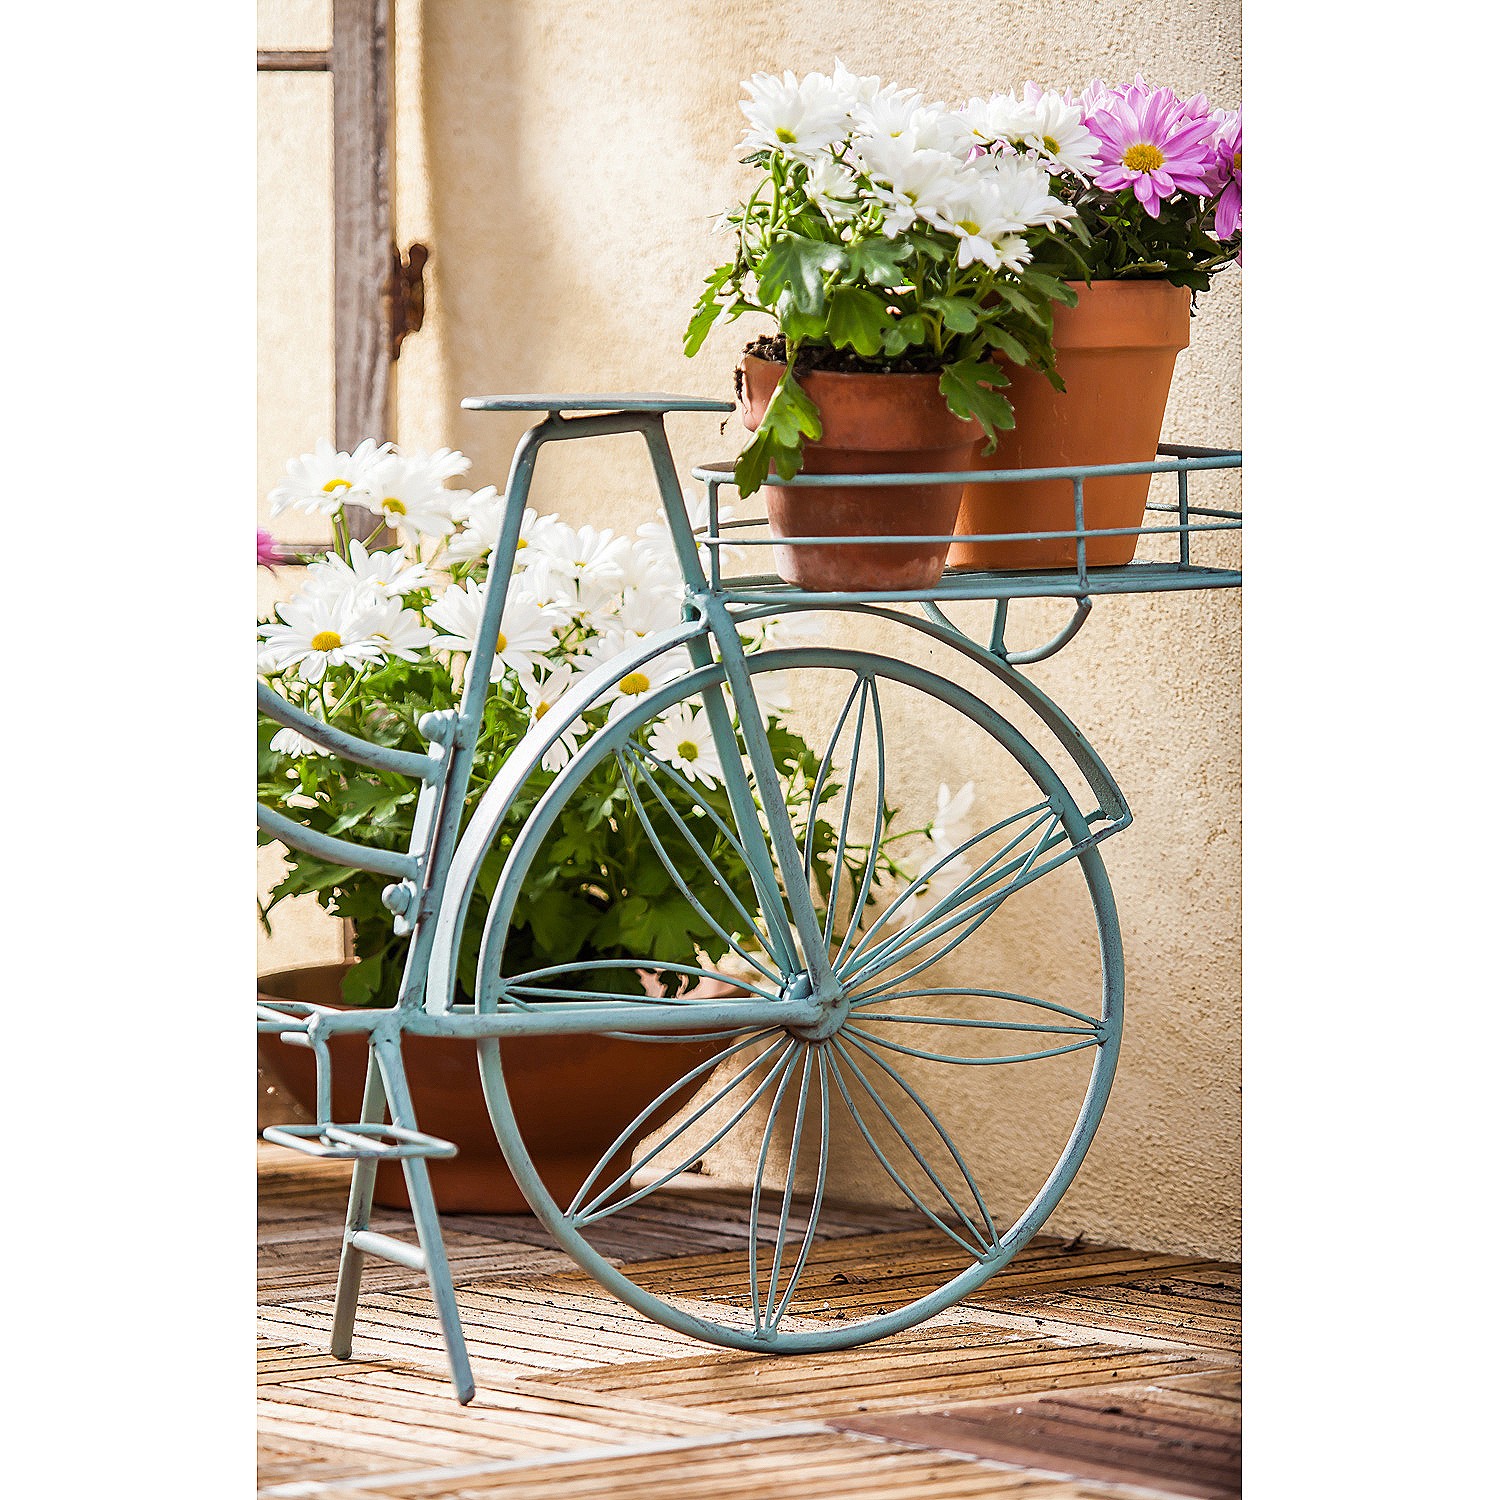 Evergreen Vintage Teal Bicycle Planter Outdoor Safe Decor - image 5 of 5